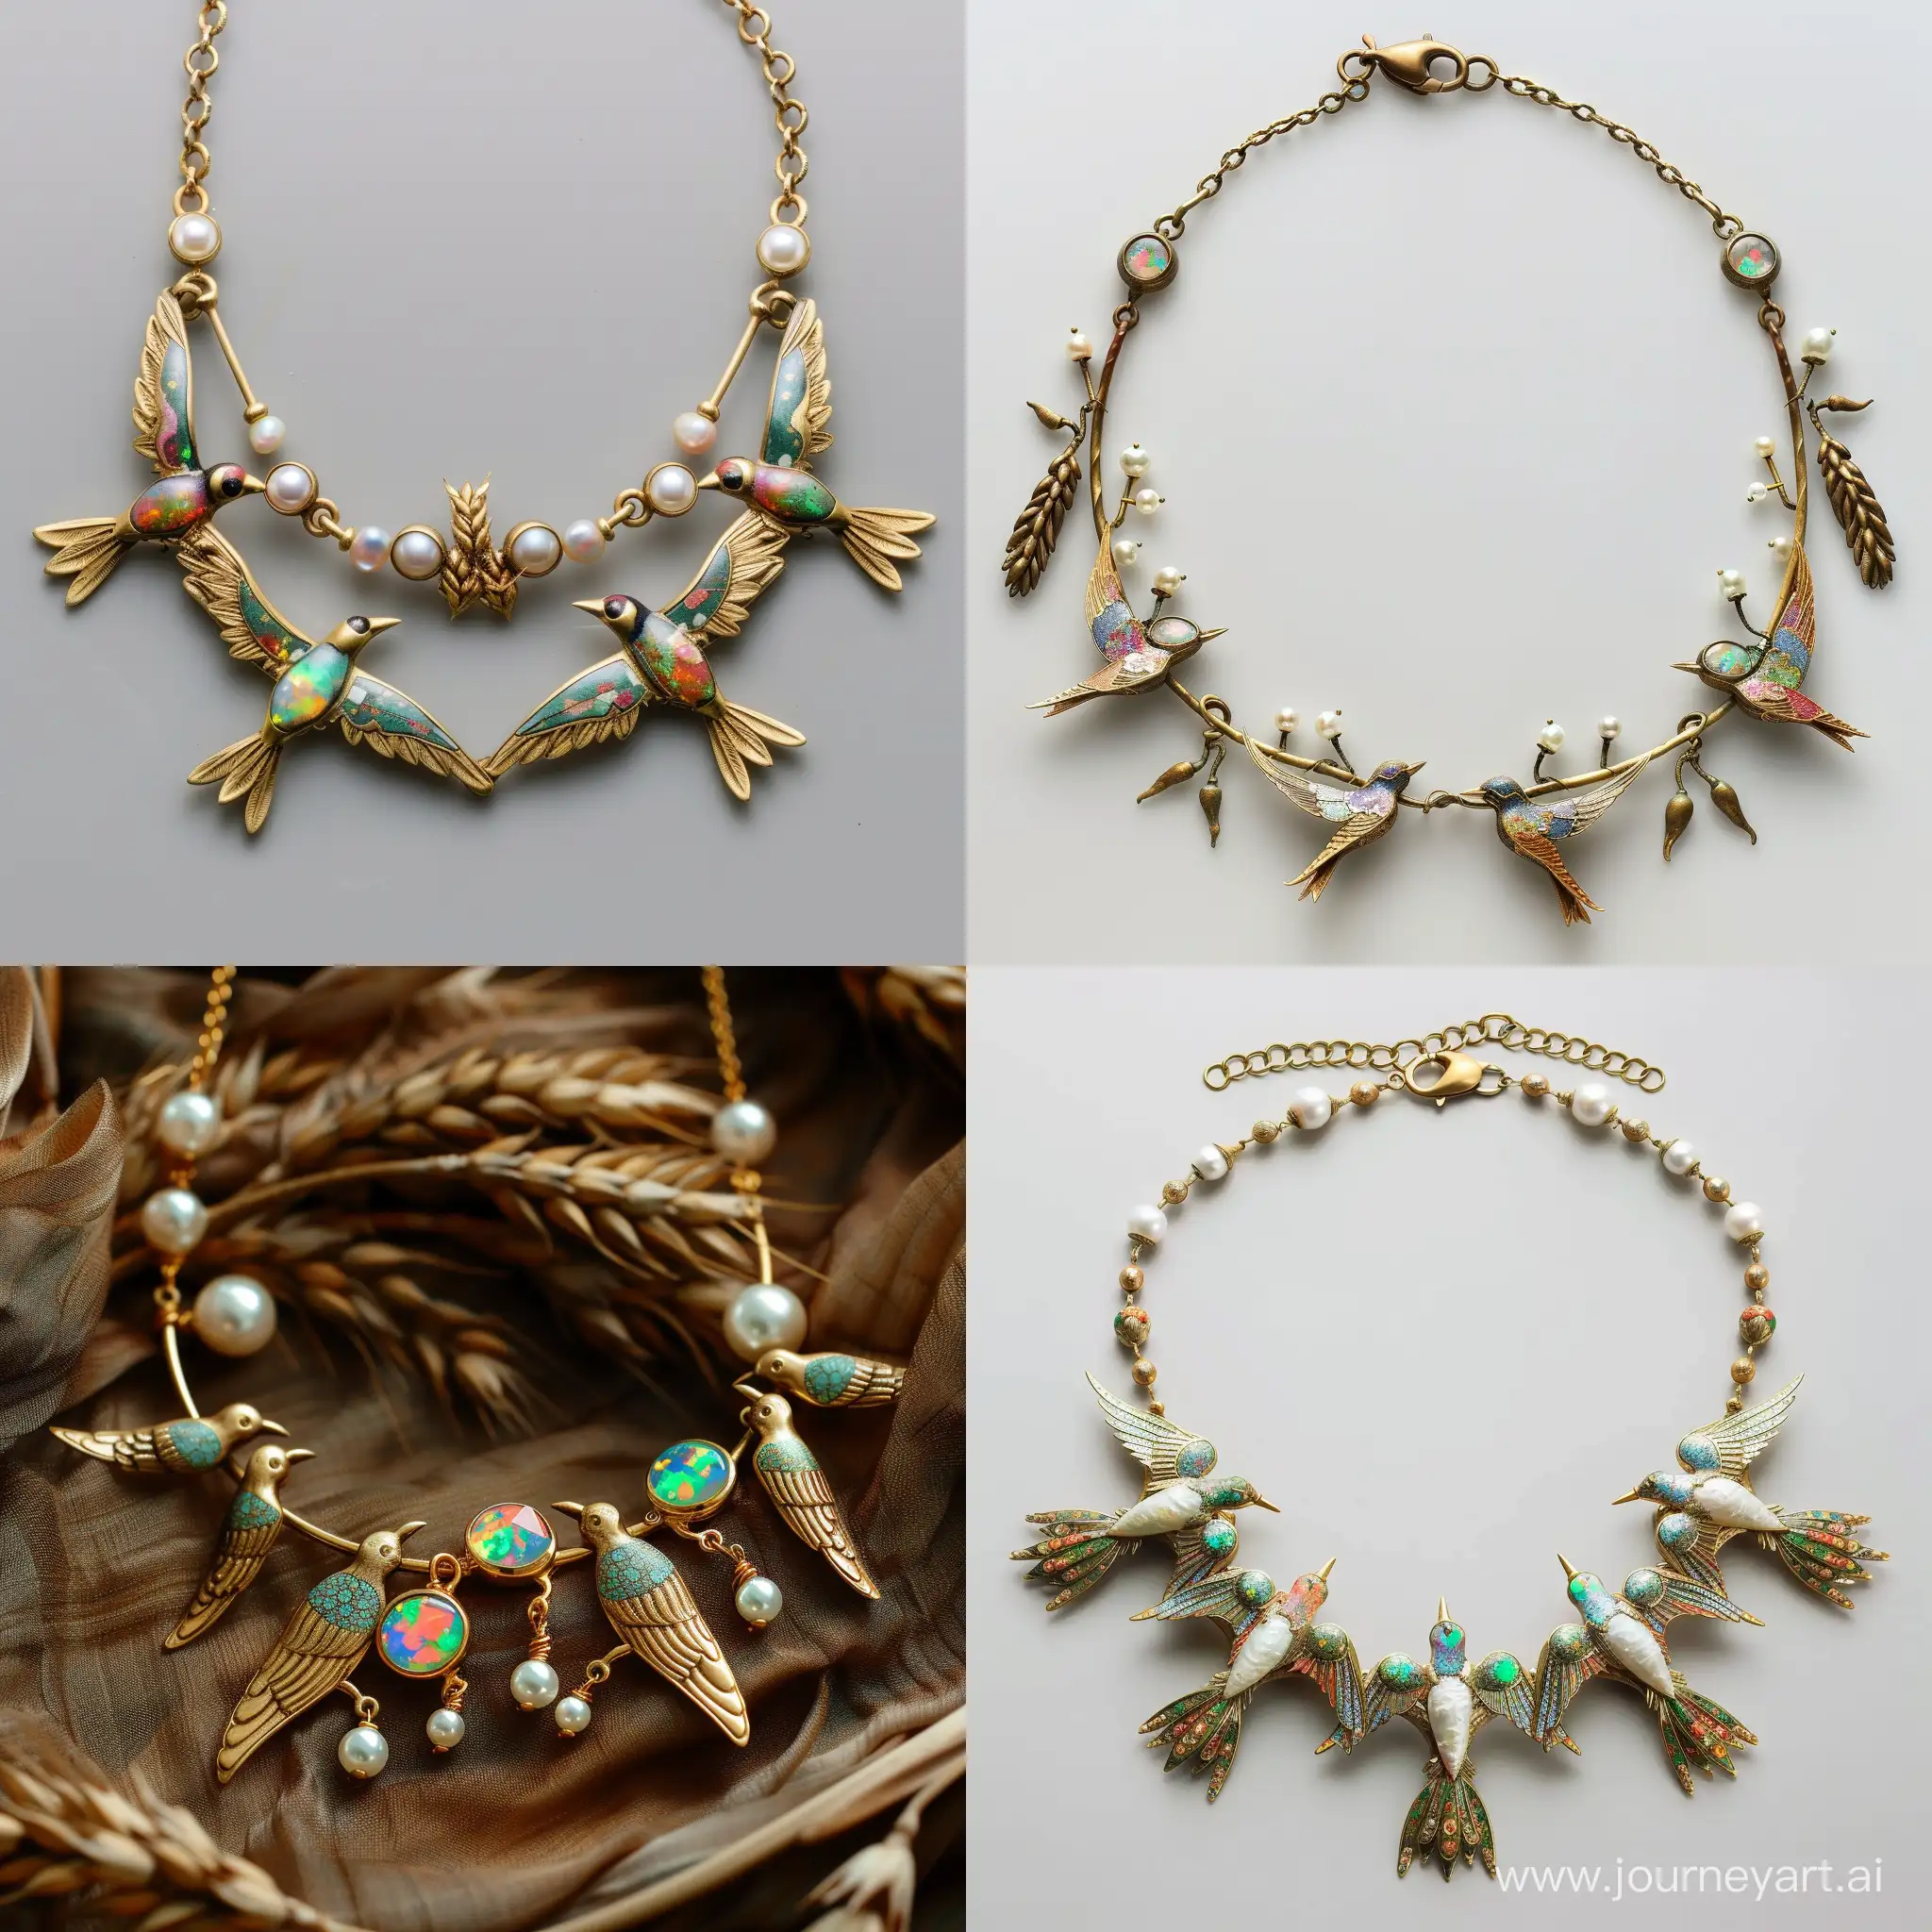 Brass-Swallow-Necklace-with-Cloisonn-Enamel-Technique-Pearls-and-Opals